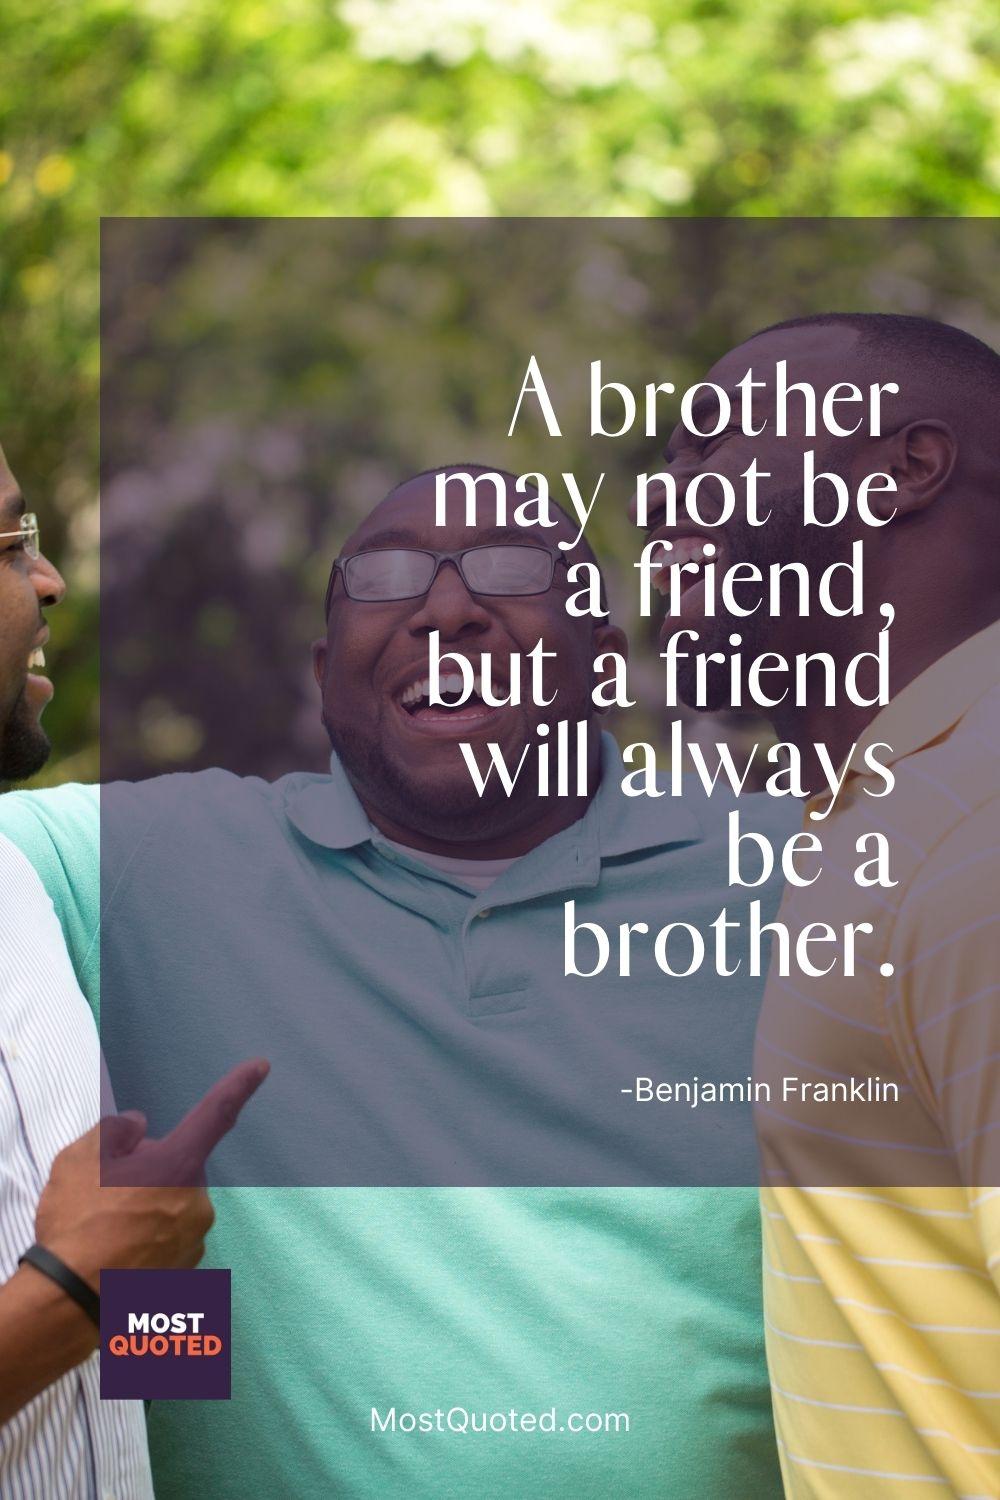 A brother may not be a friend, but a friend will always be a brother. - Benjamin Franklin